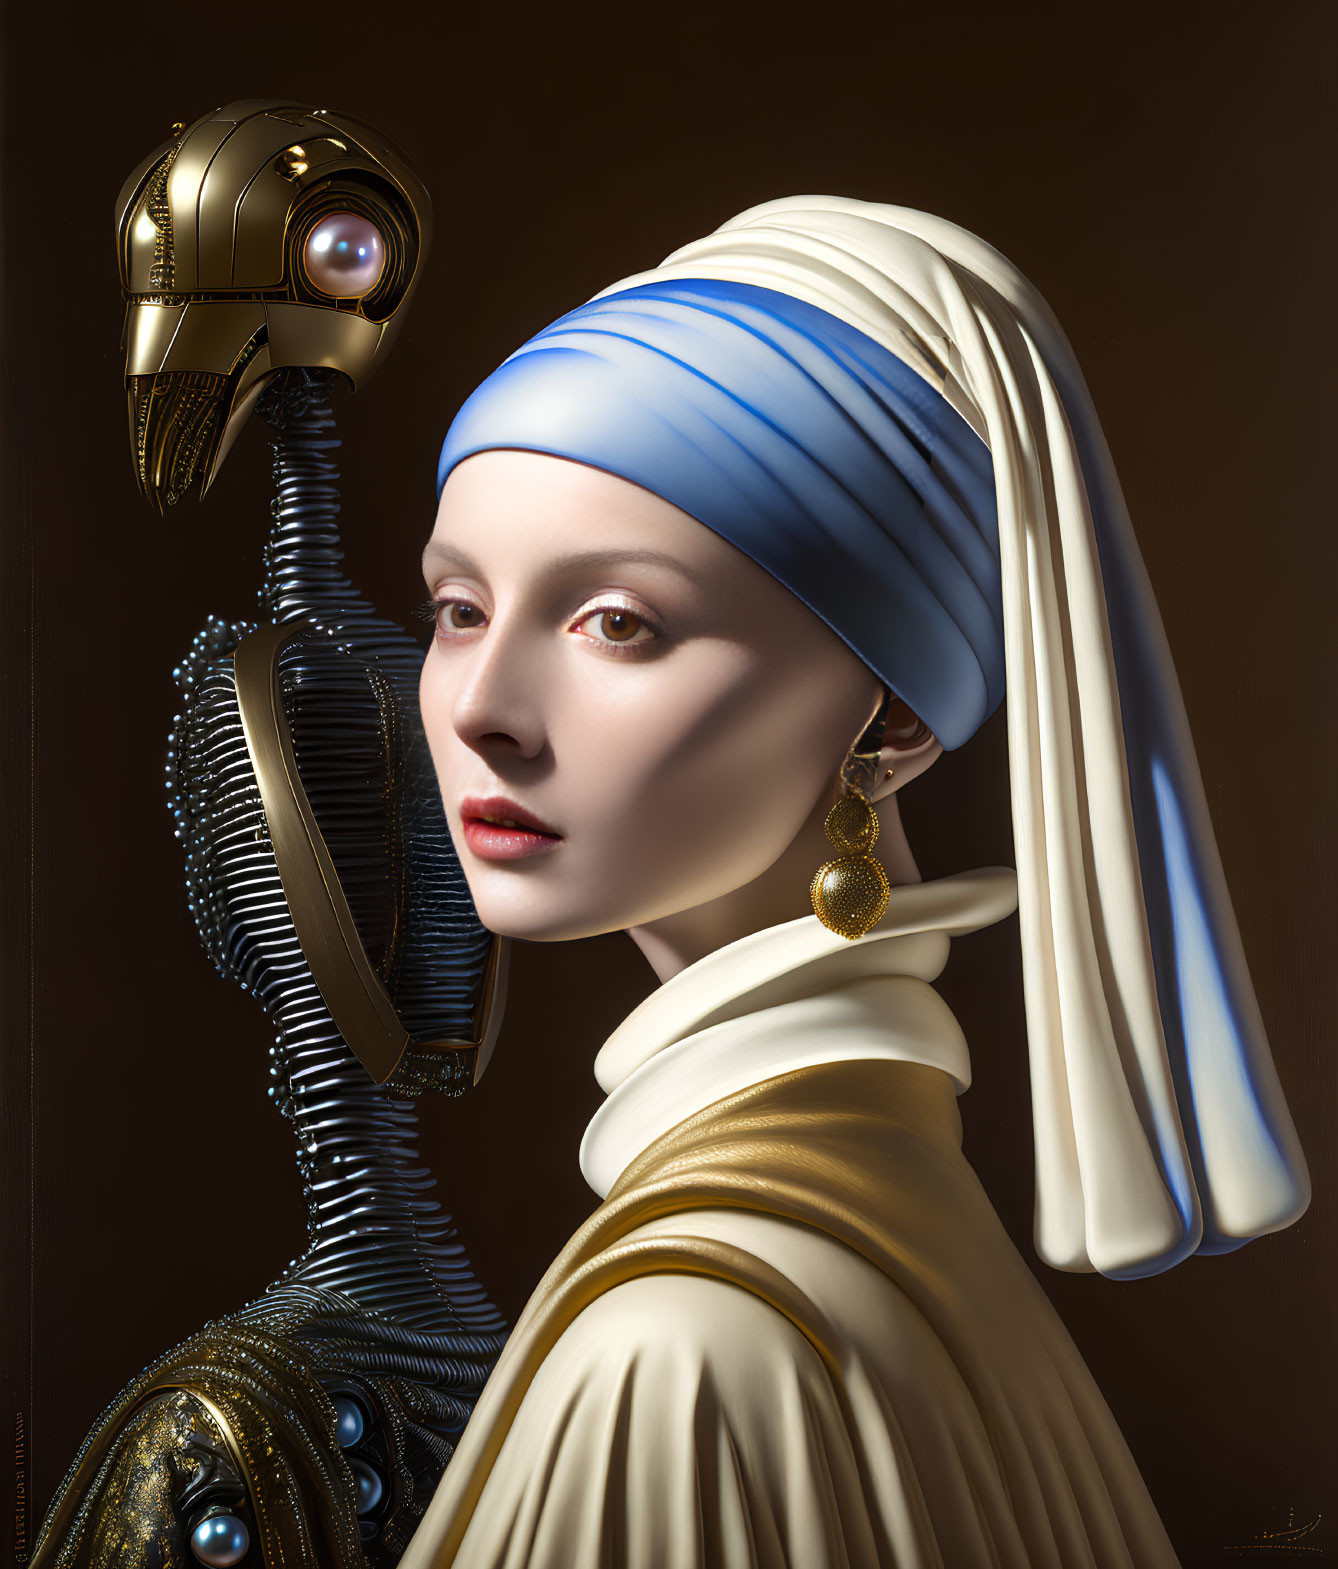 Portrait featuring woman in white and blue headdress with futuristic robotic arm.